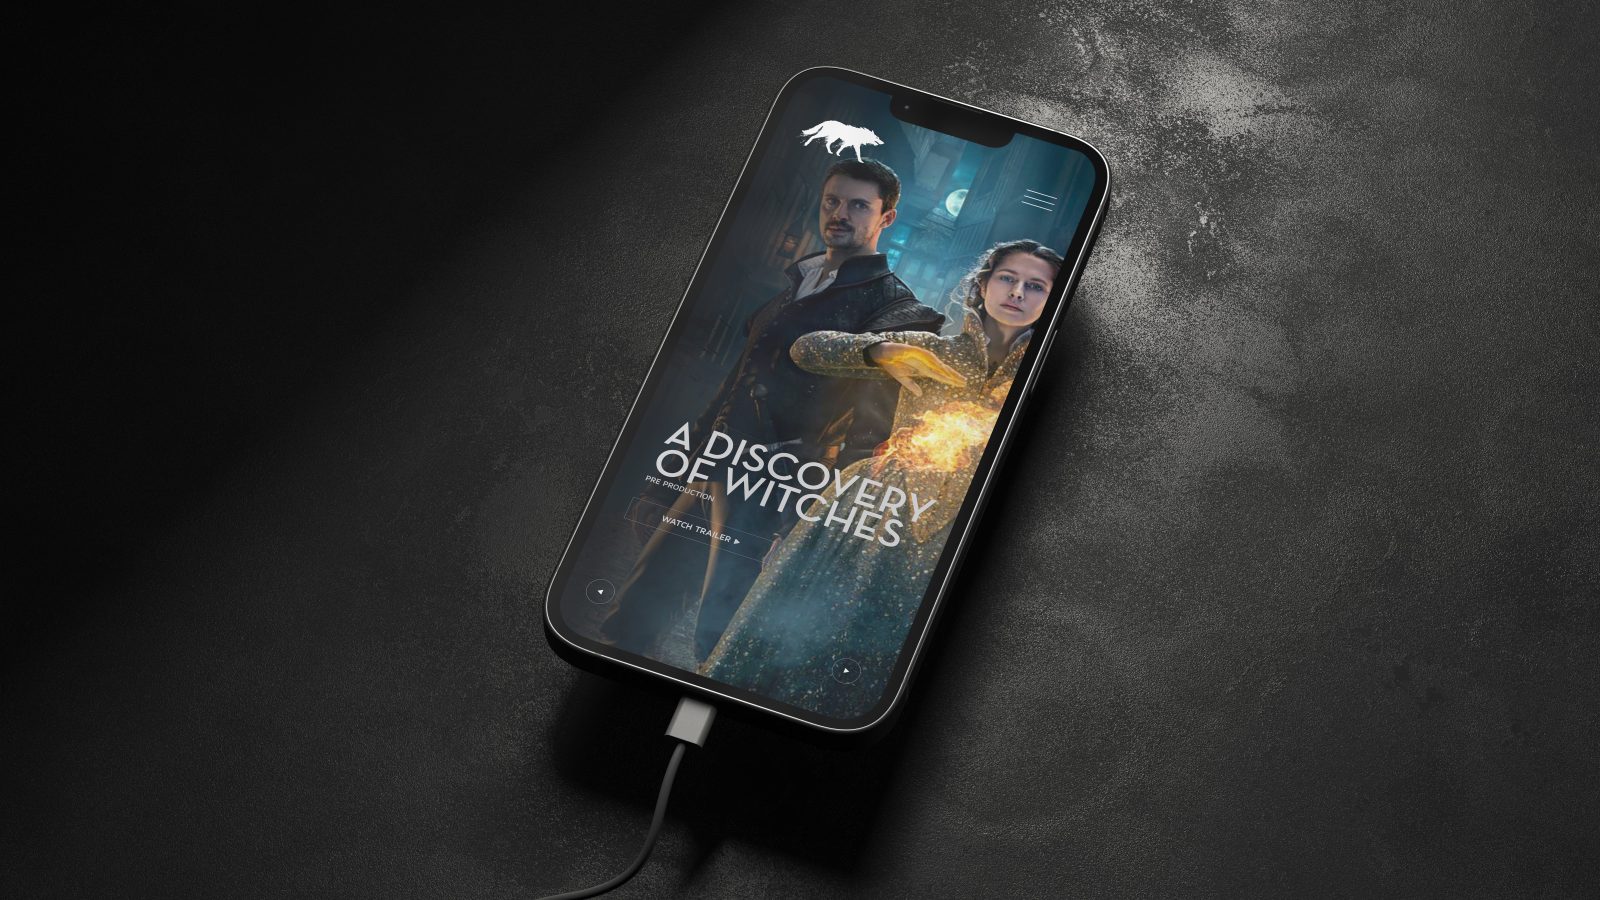 A smartphone lying on a dark textured surface with its screen displaying the poster for 